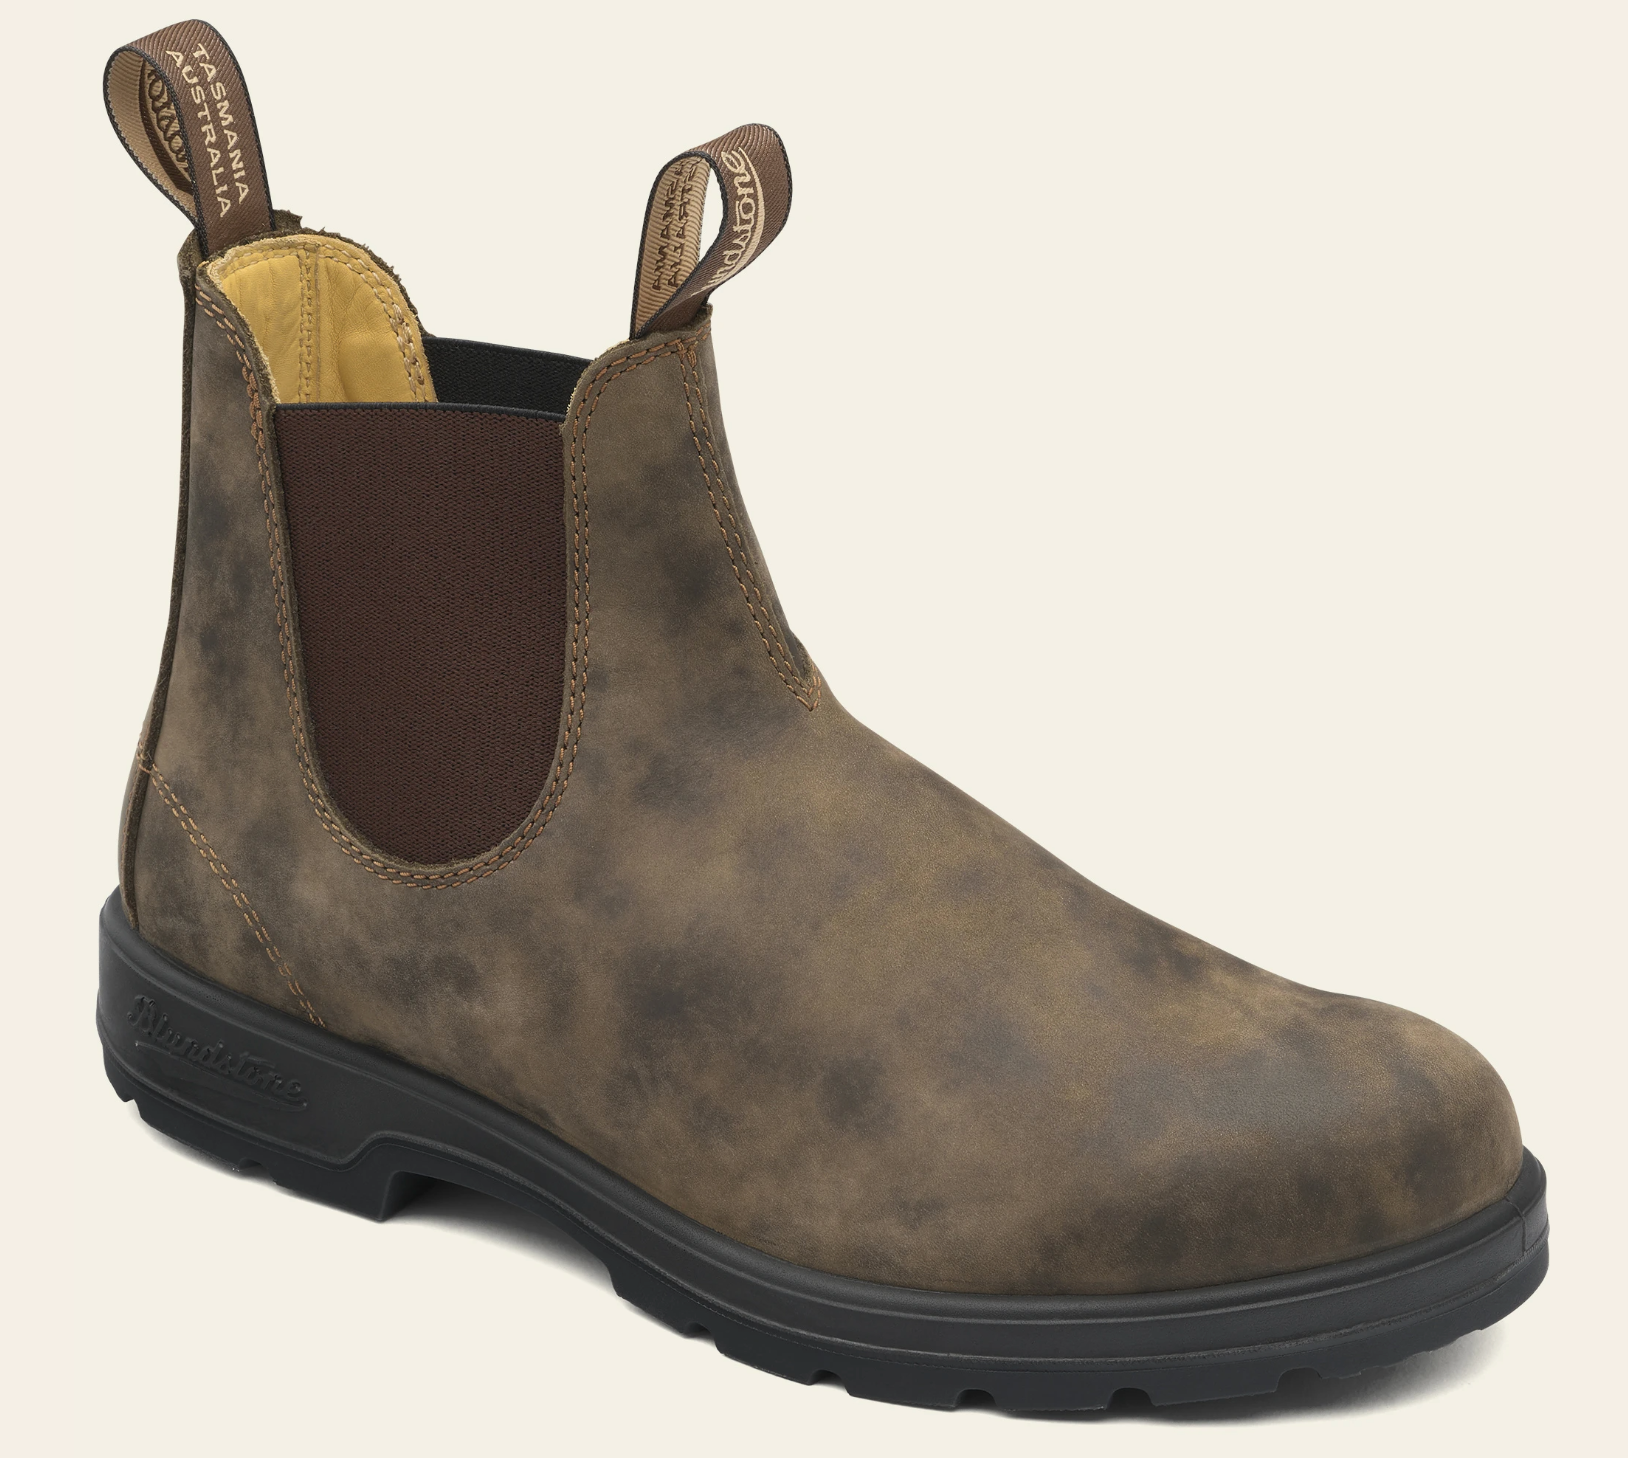 Blundstone 585 Leather Pull-On Boot (Big Kid)